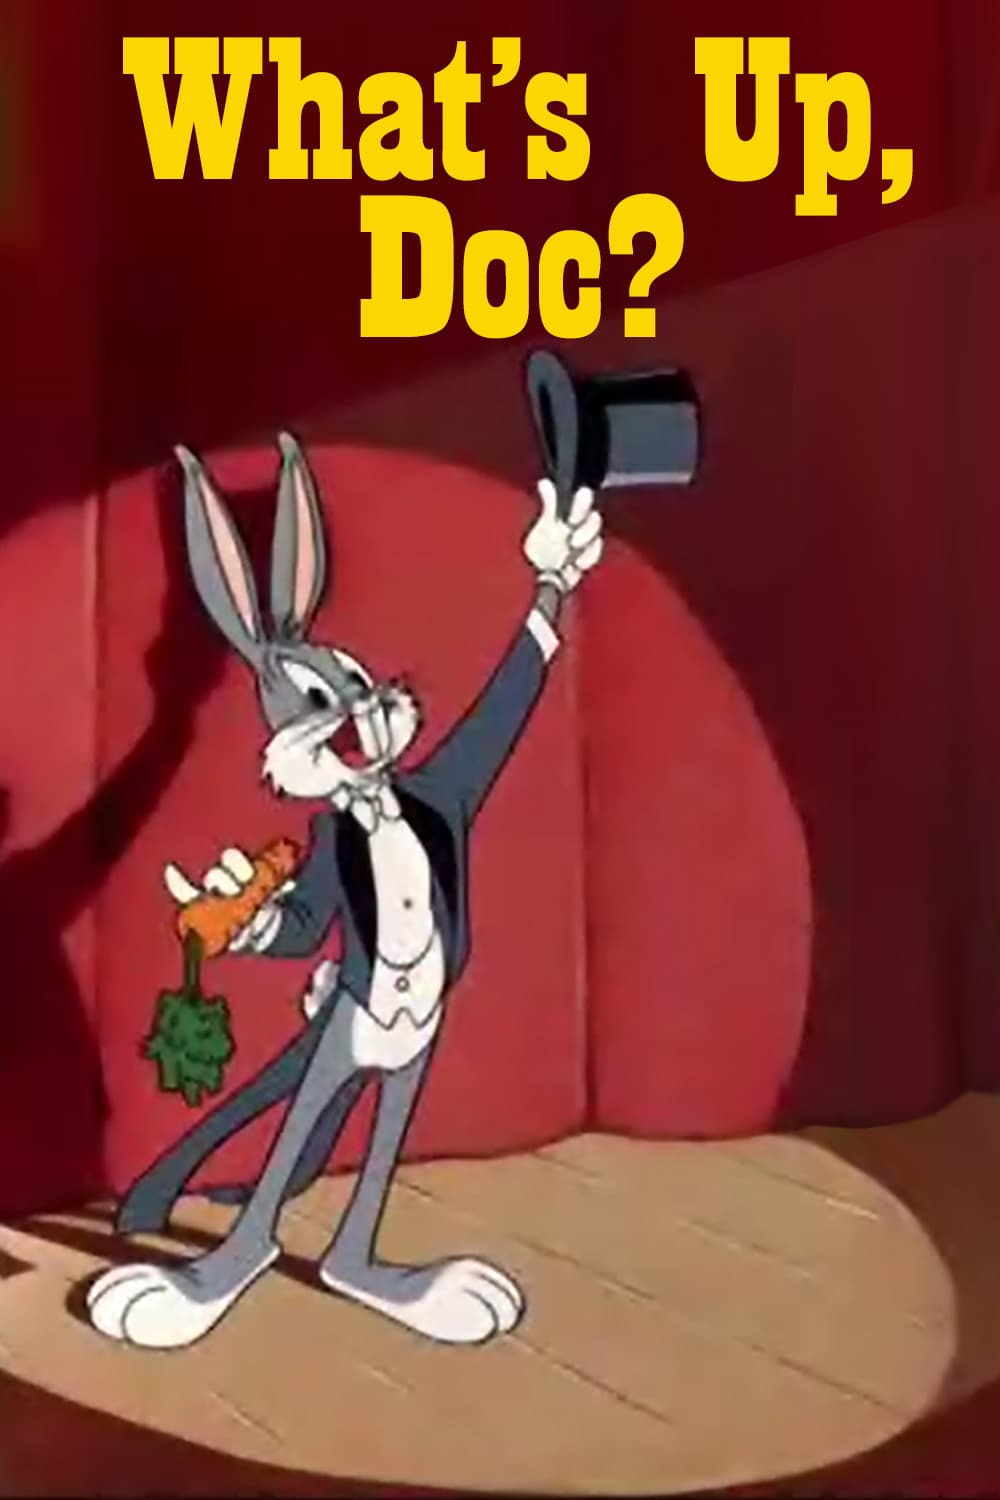 Is' was Doc?